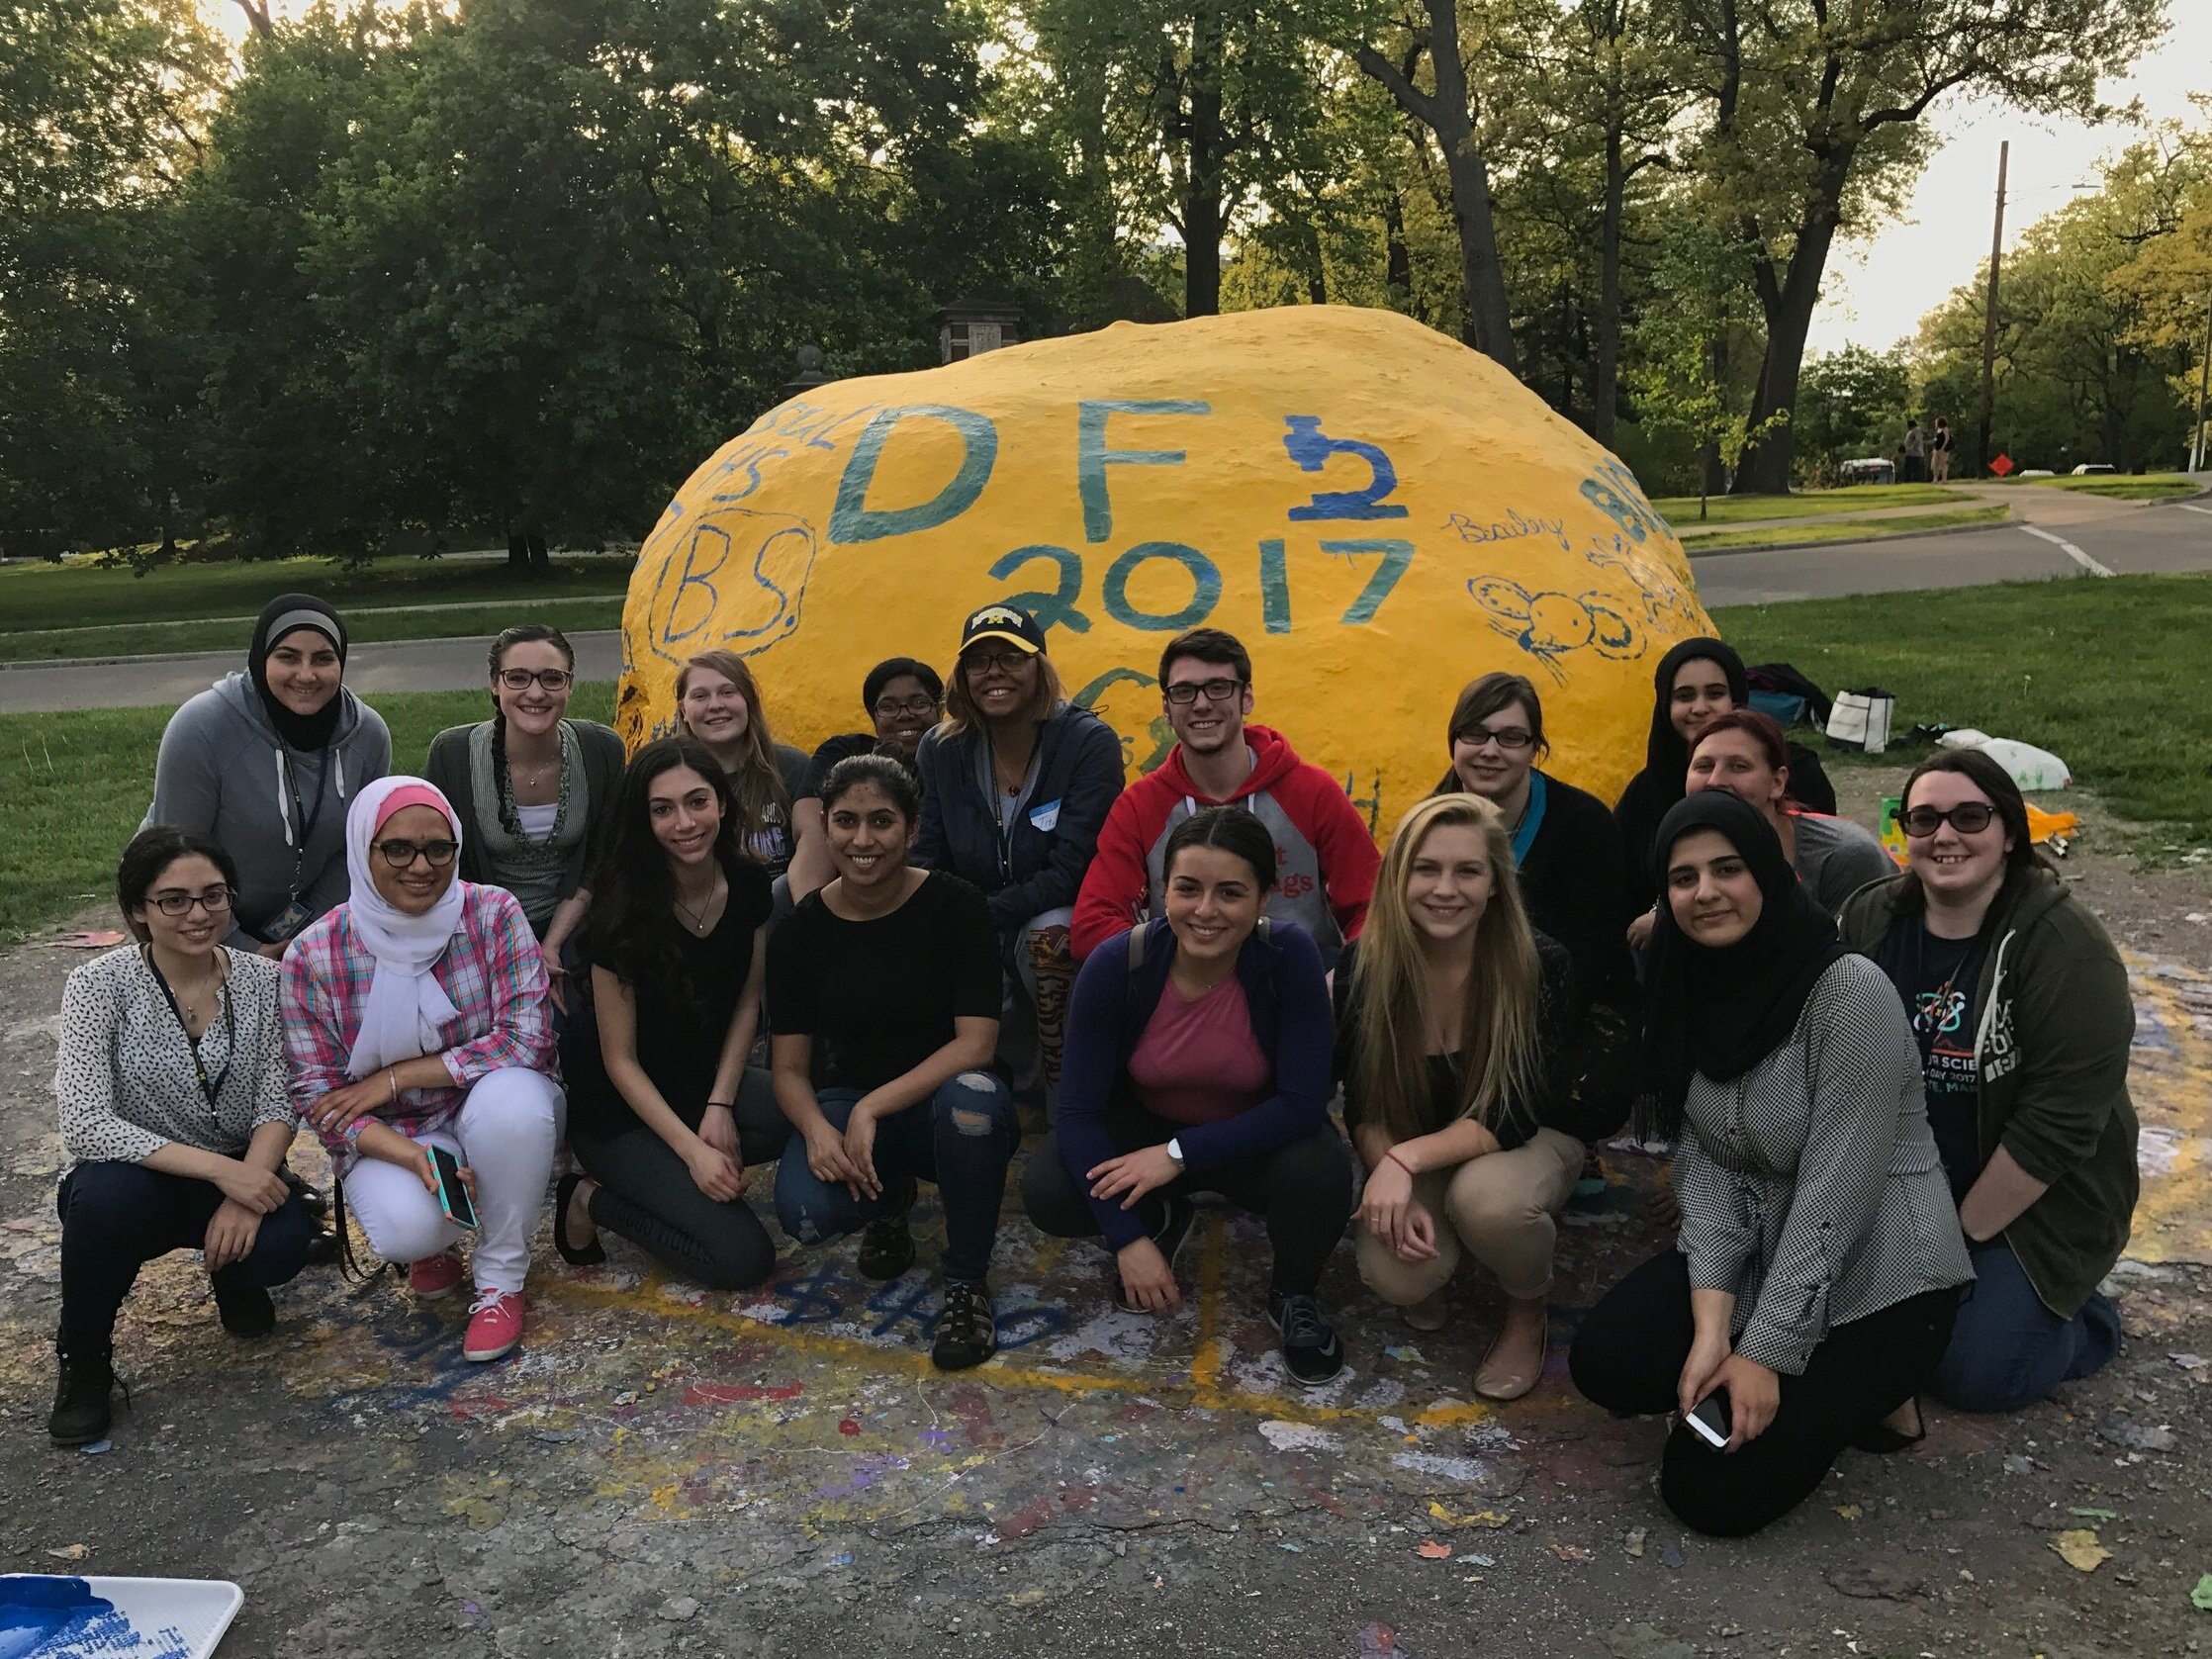  First annual painting of The Rock in honor of DFB 